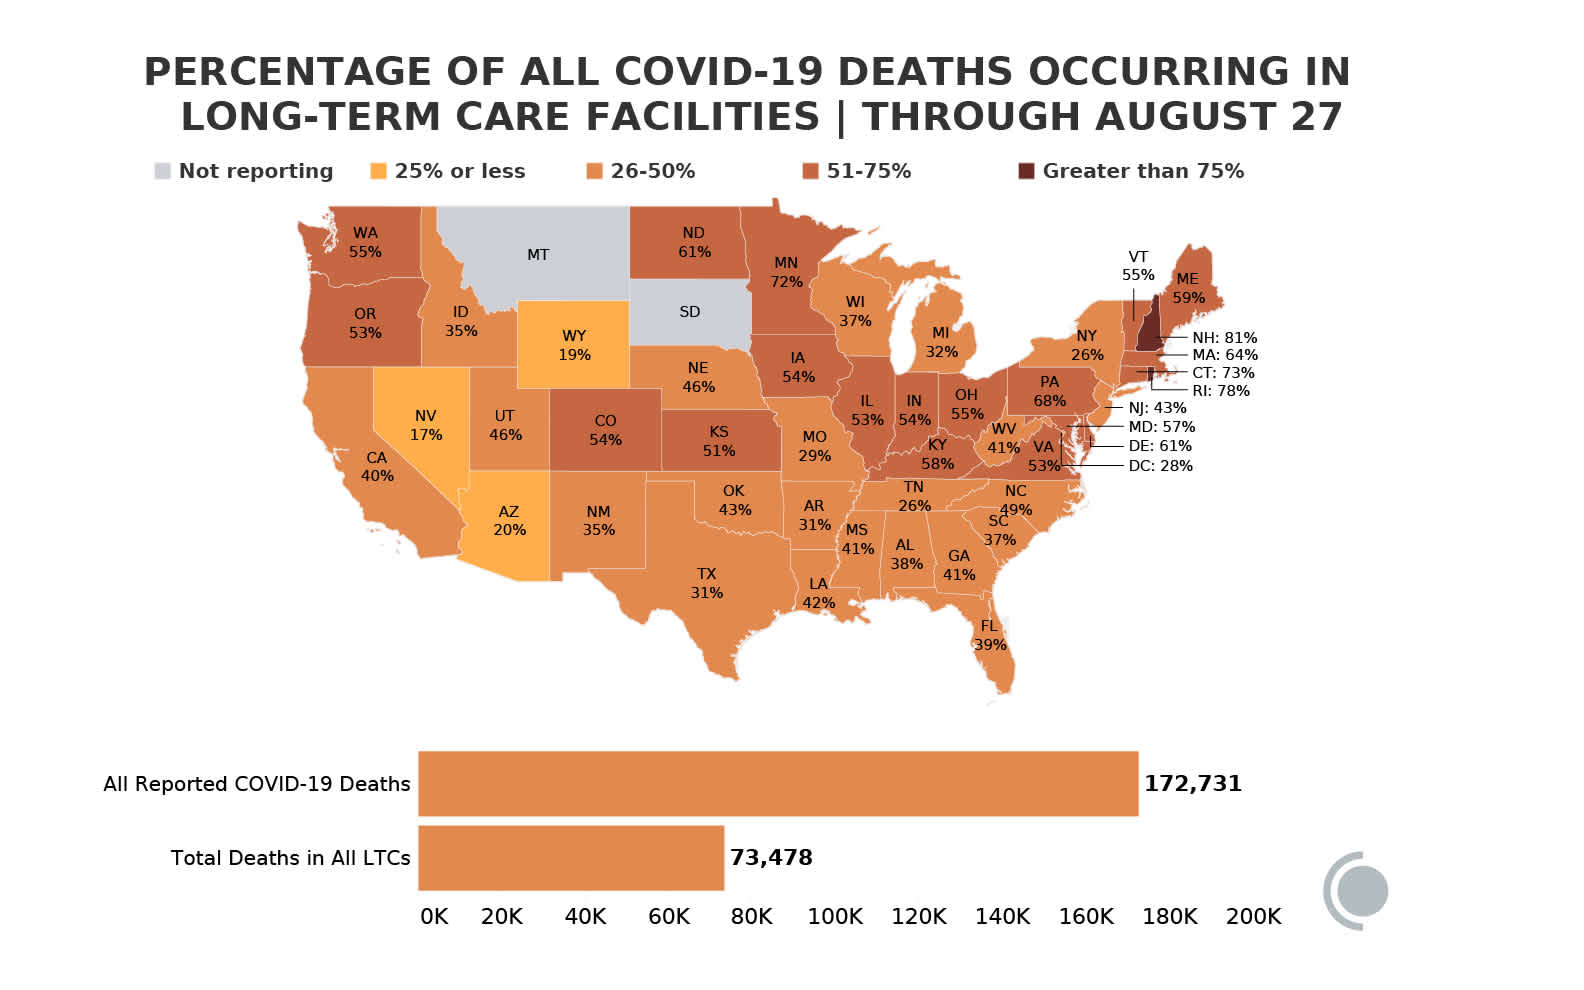 Map showing, for each state, the percentage of all that state's COVID-19 deaths that occurred in LTCs.